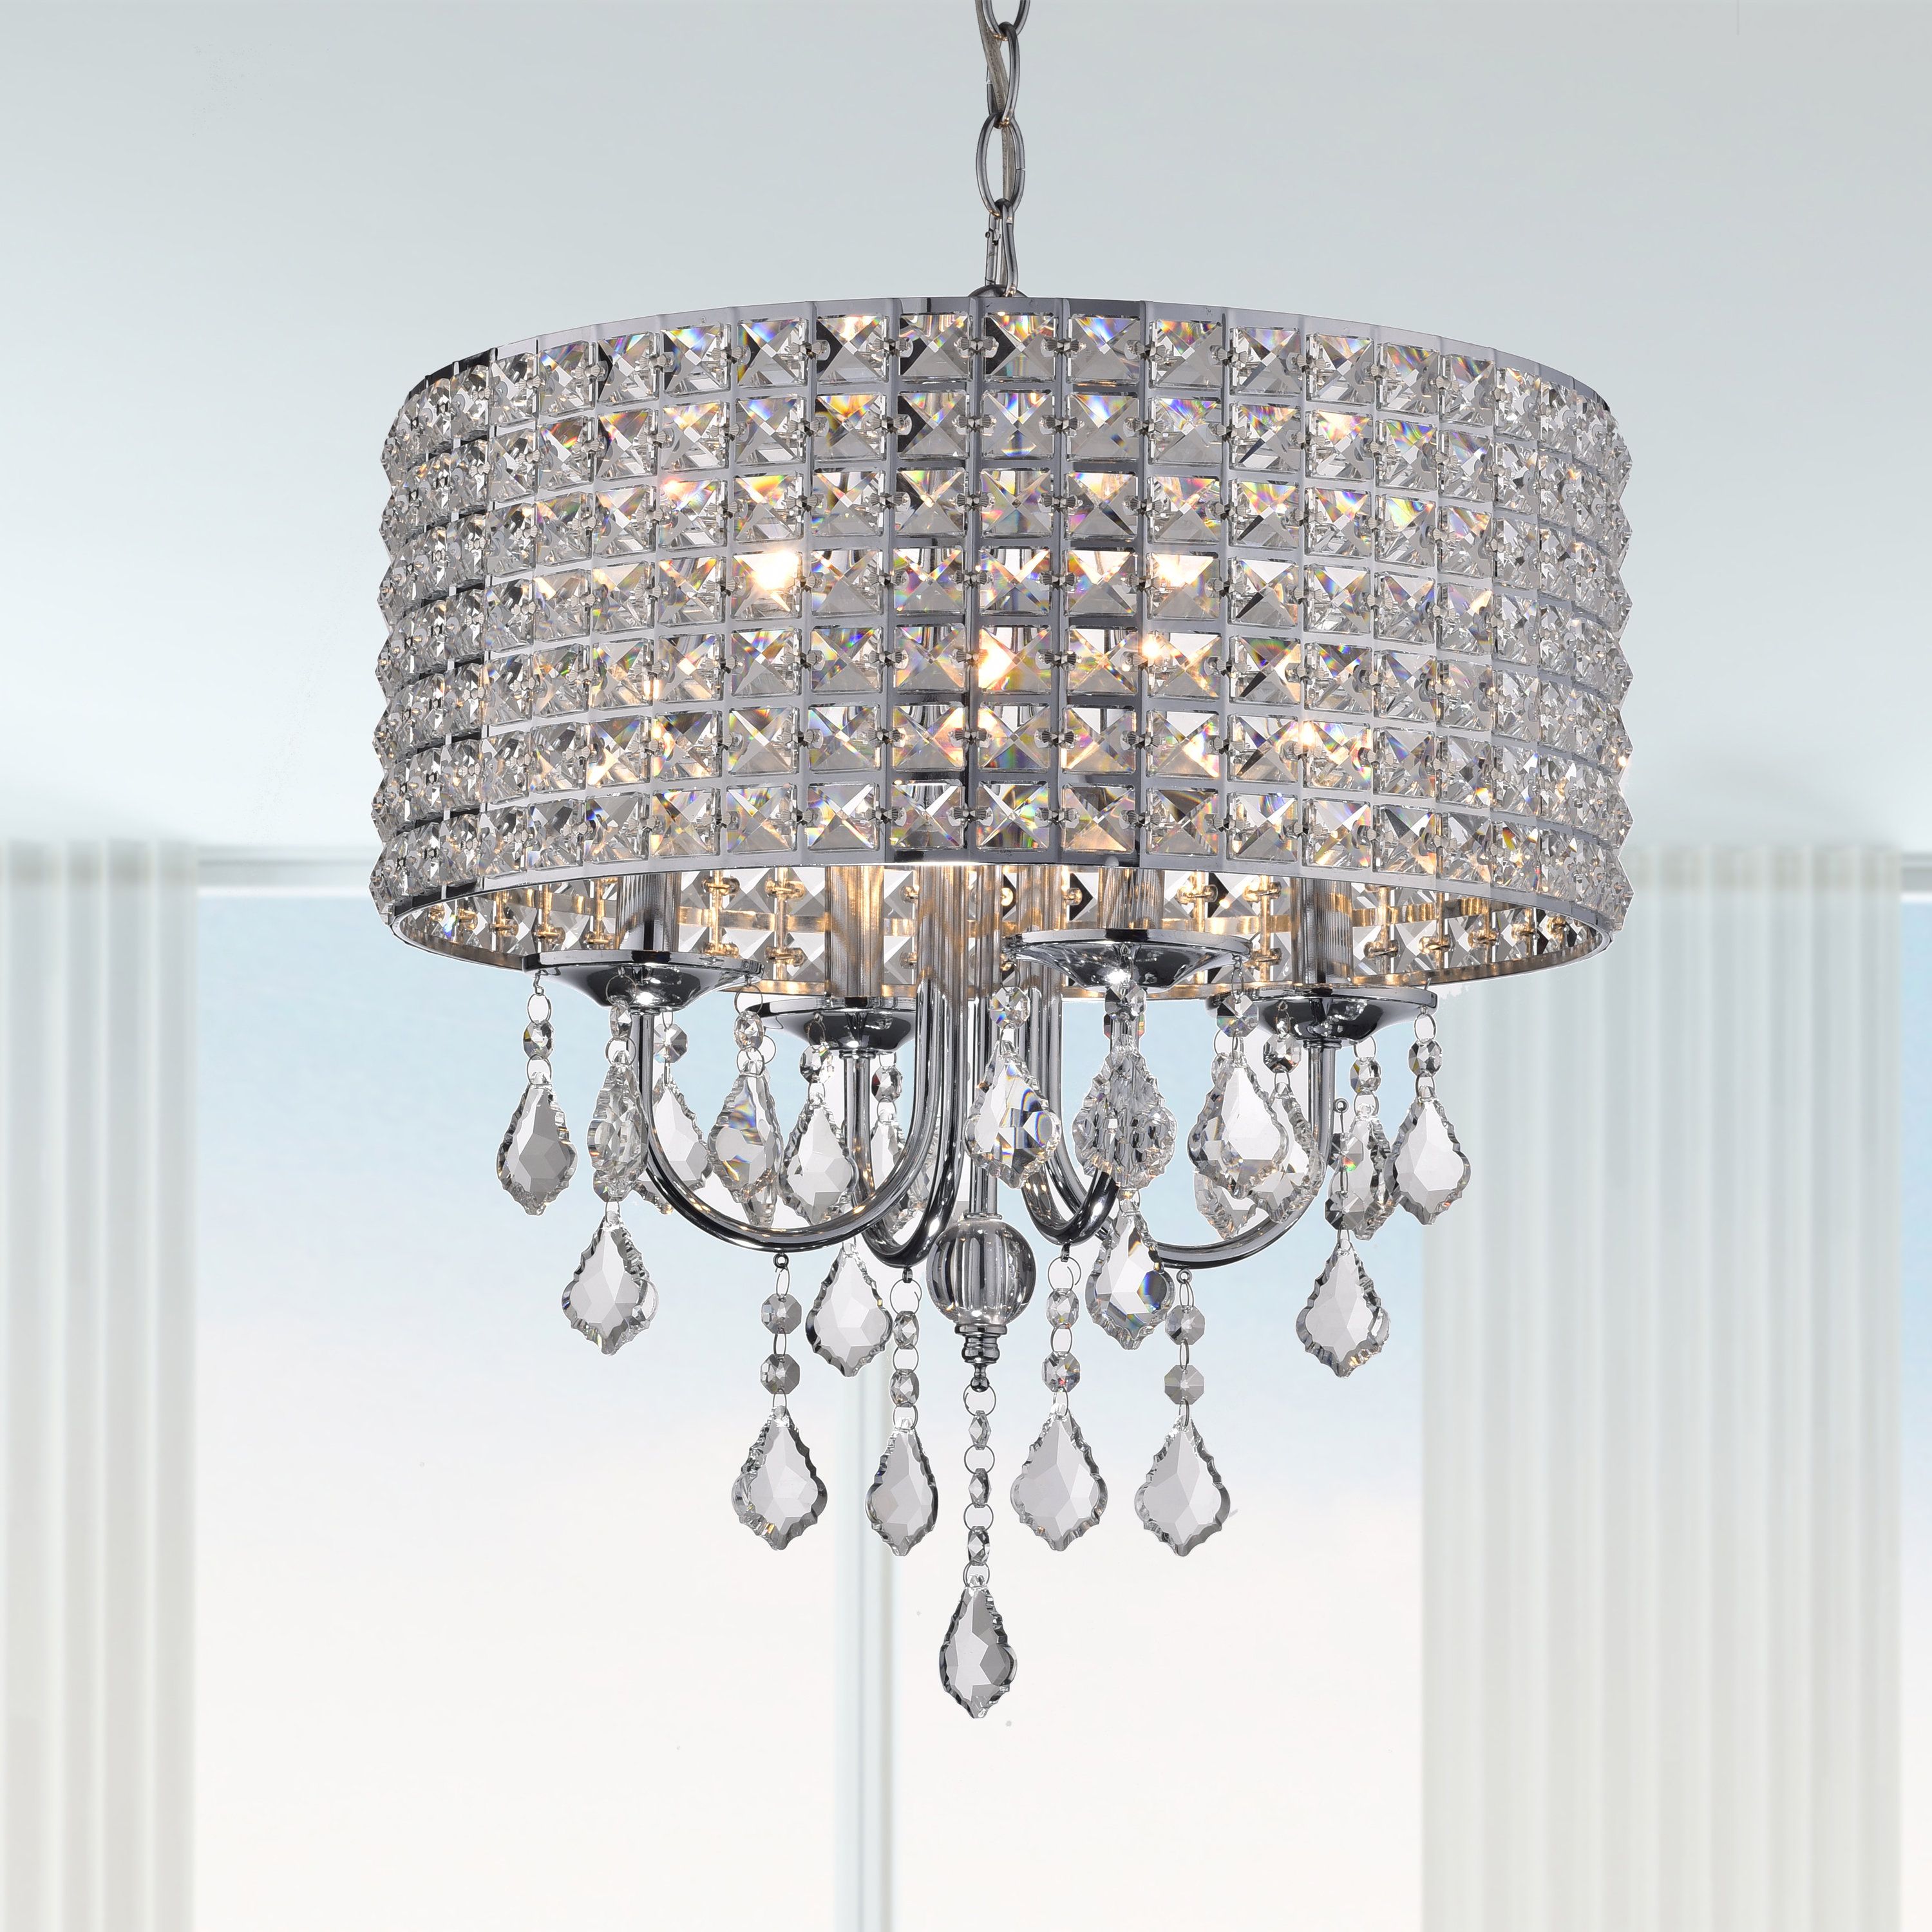 Albano 4 Light Crystal Chandelier Intended For Sinead 4 Light Chandeliers (View 10 of 30)